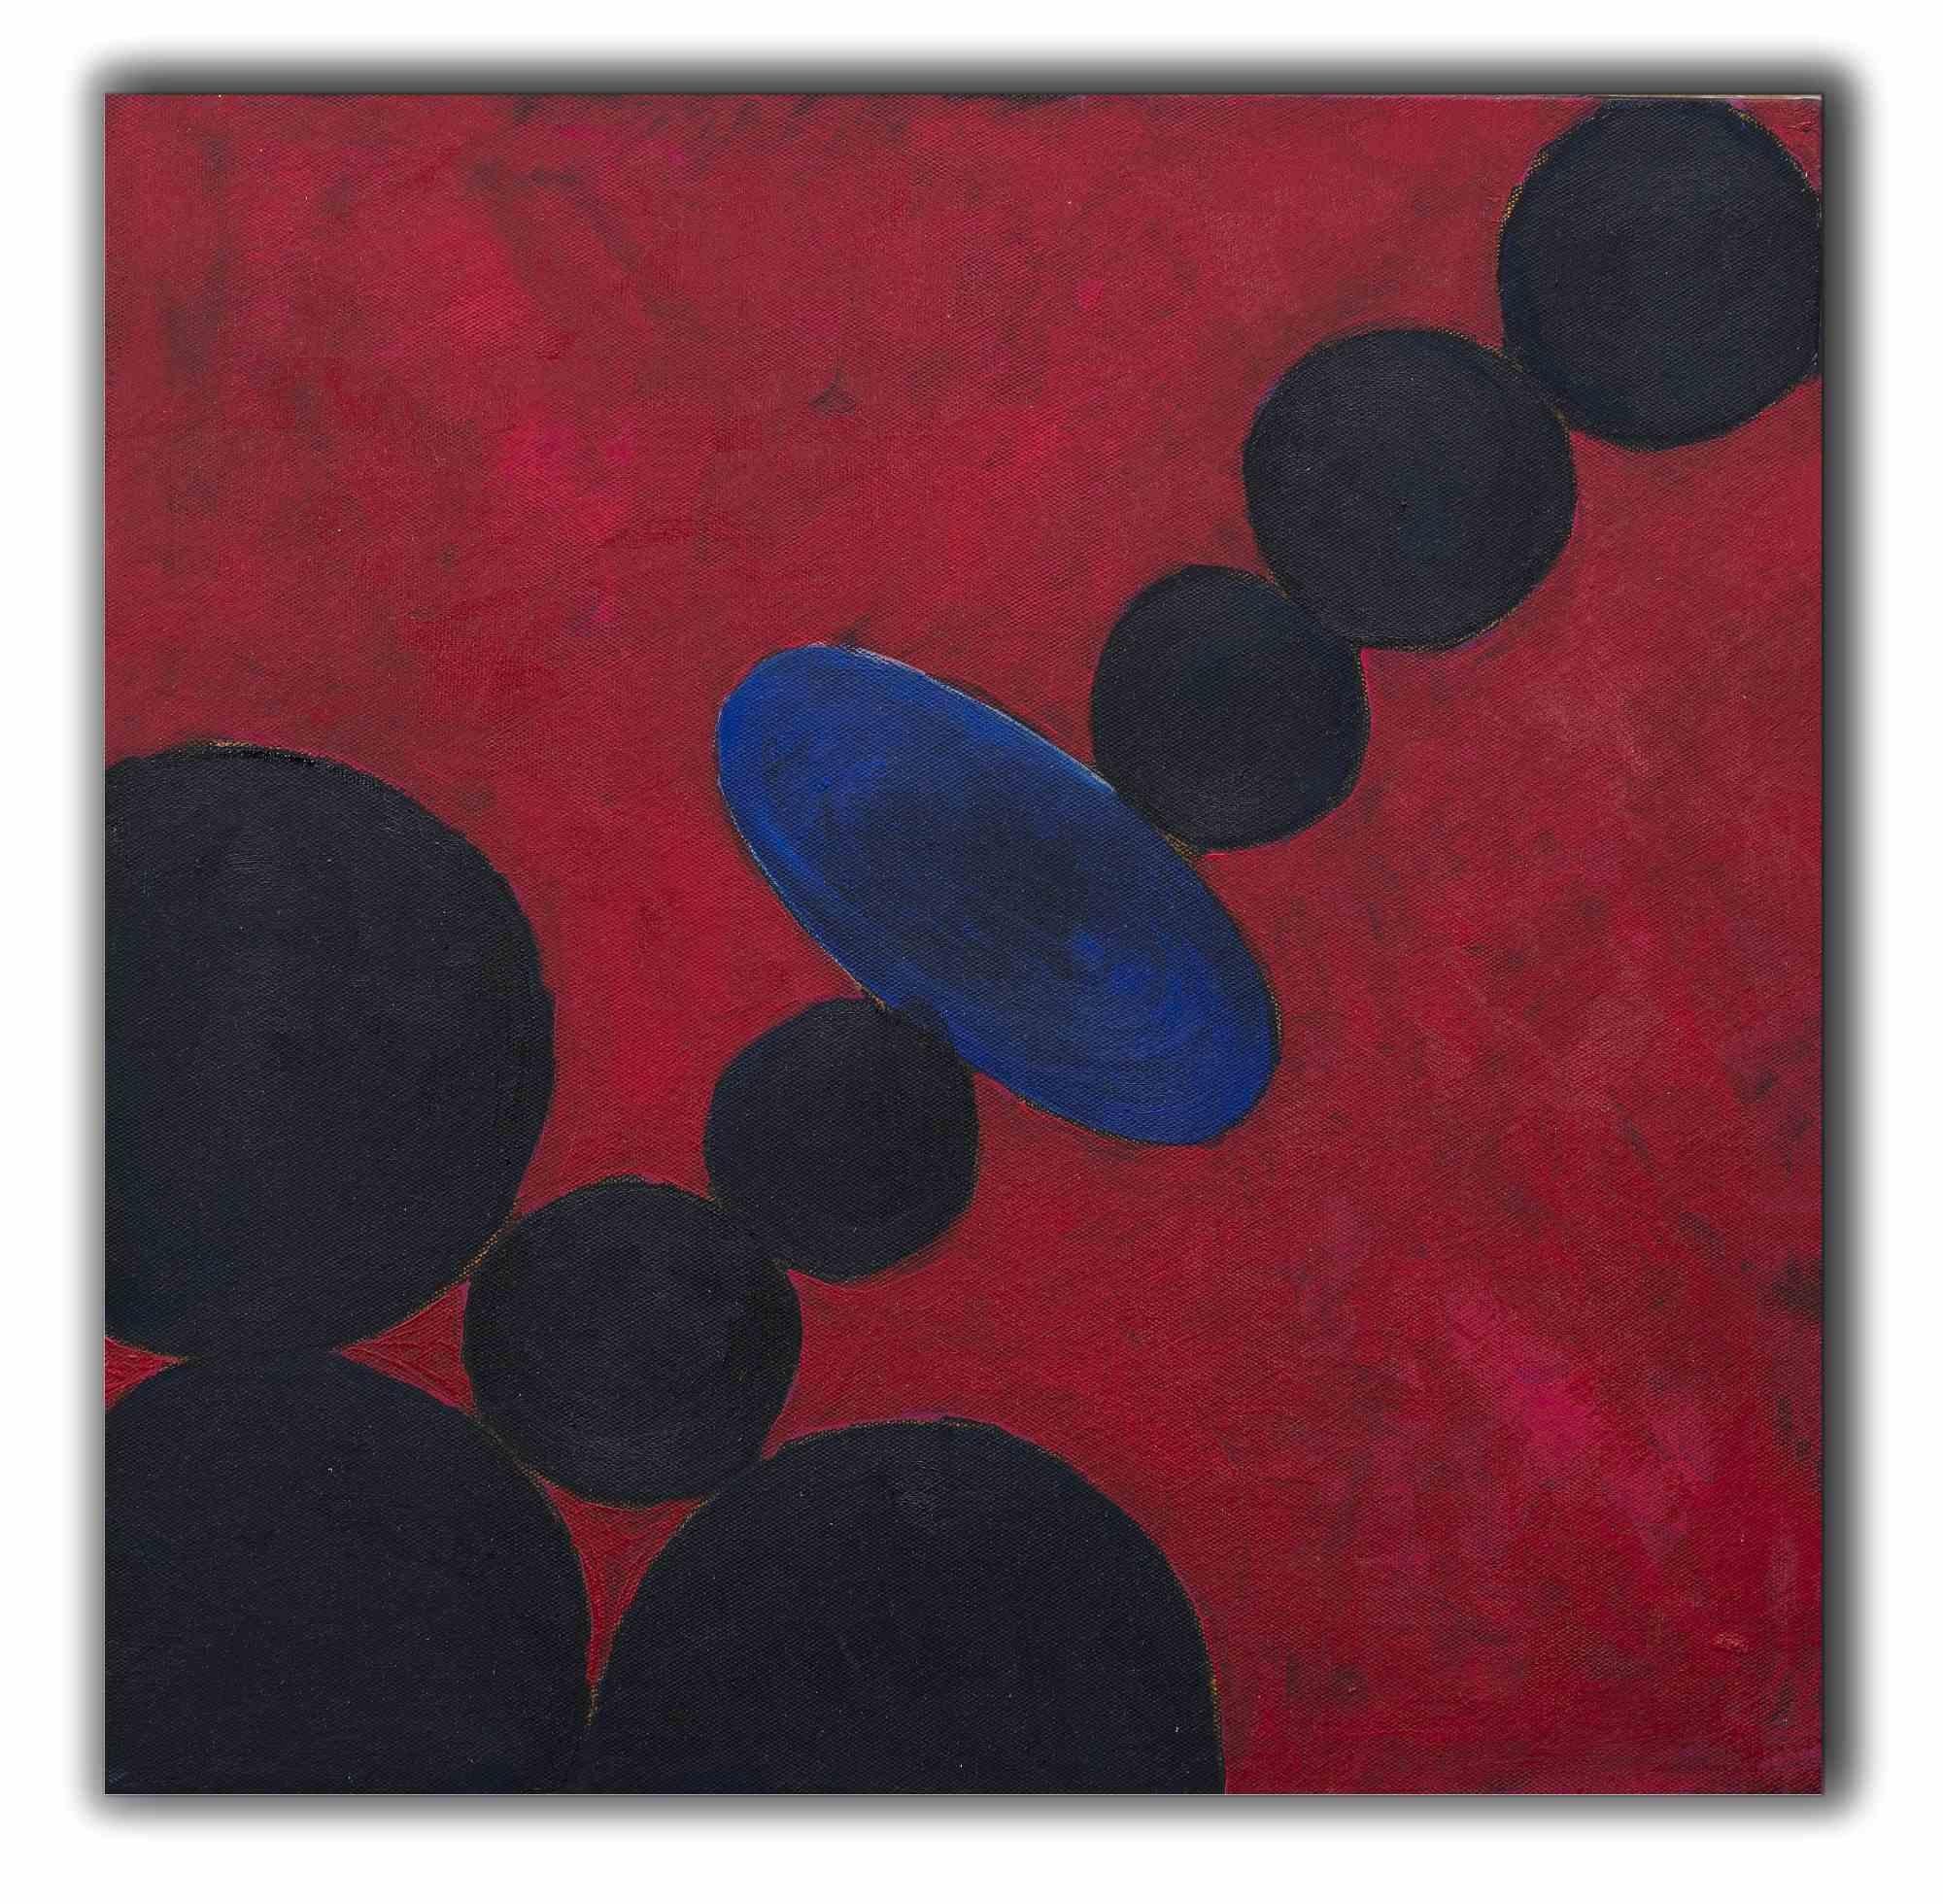 Red Composition with Circles - Oil On Canvas by Giorgio Lo Fermo - 2020